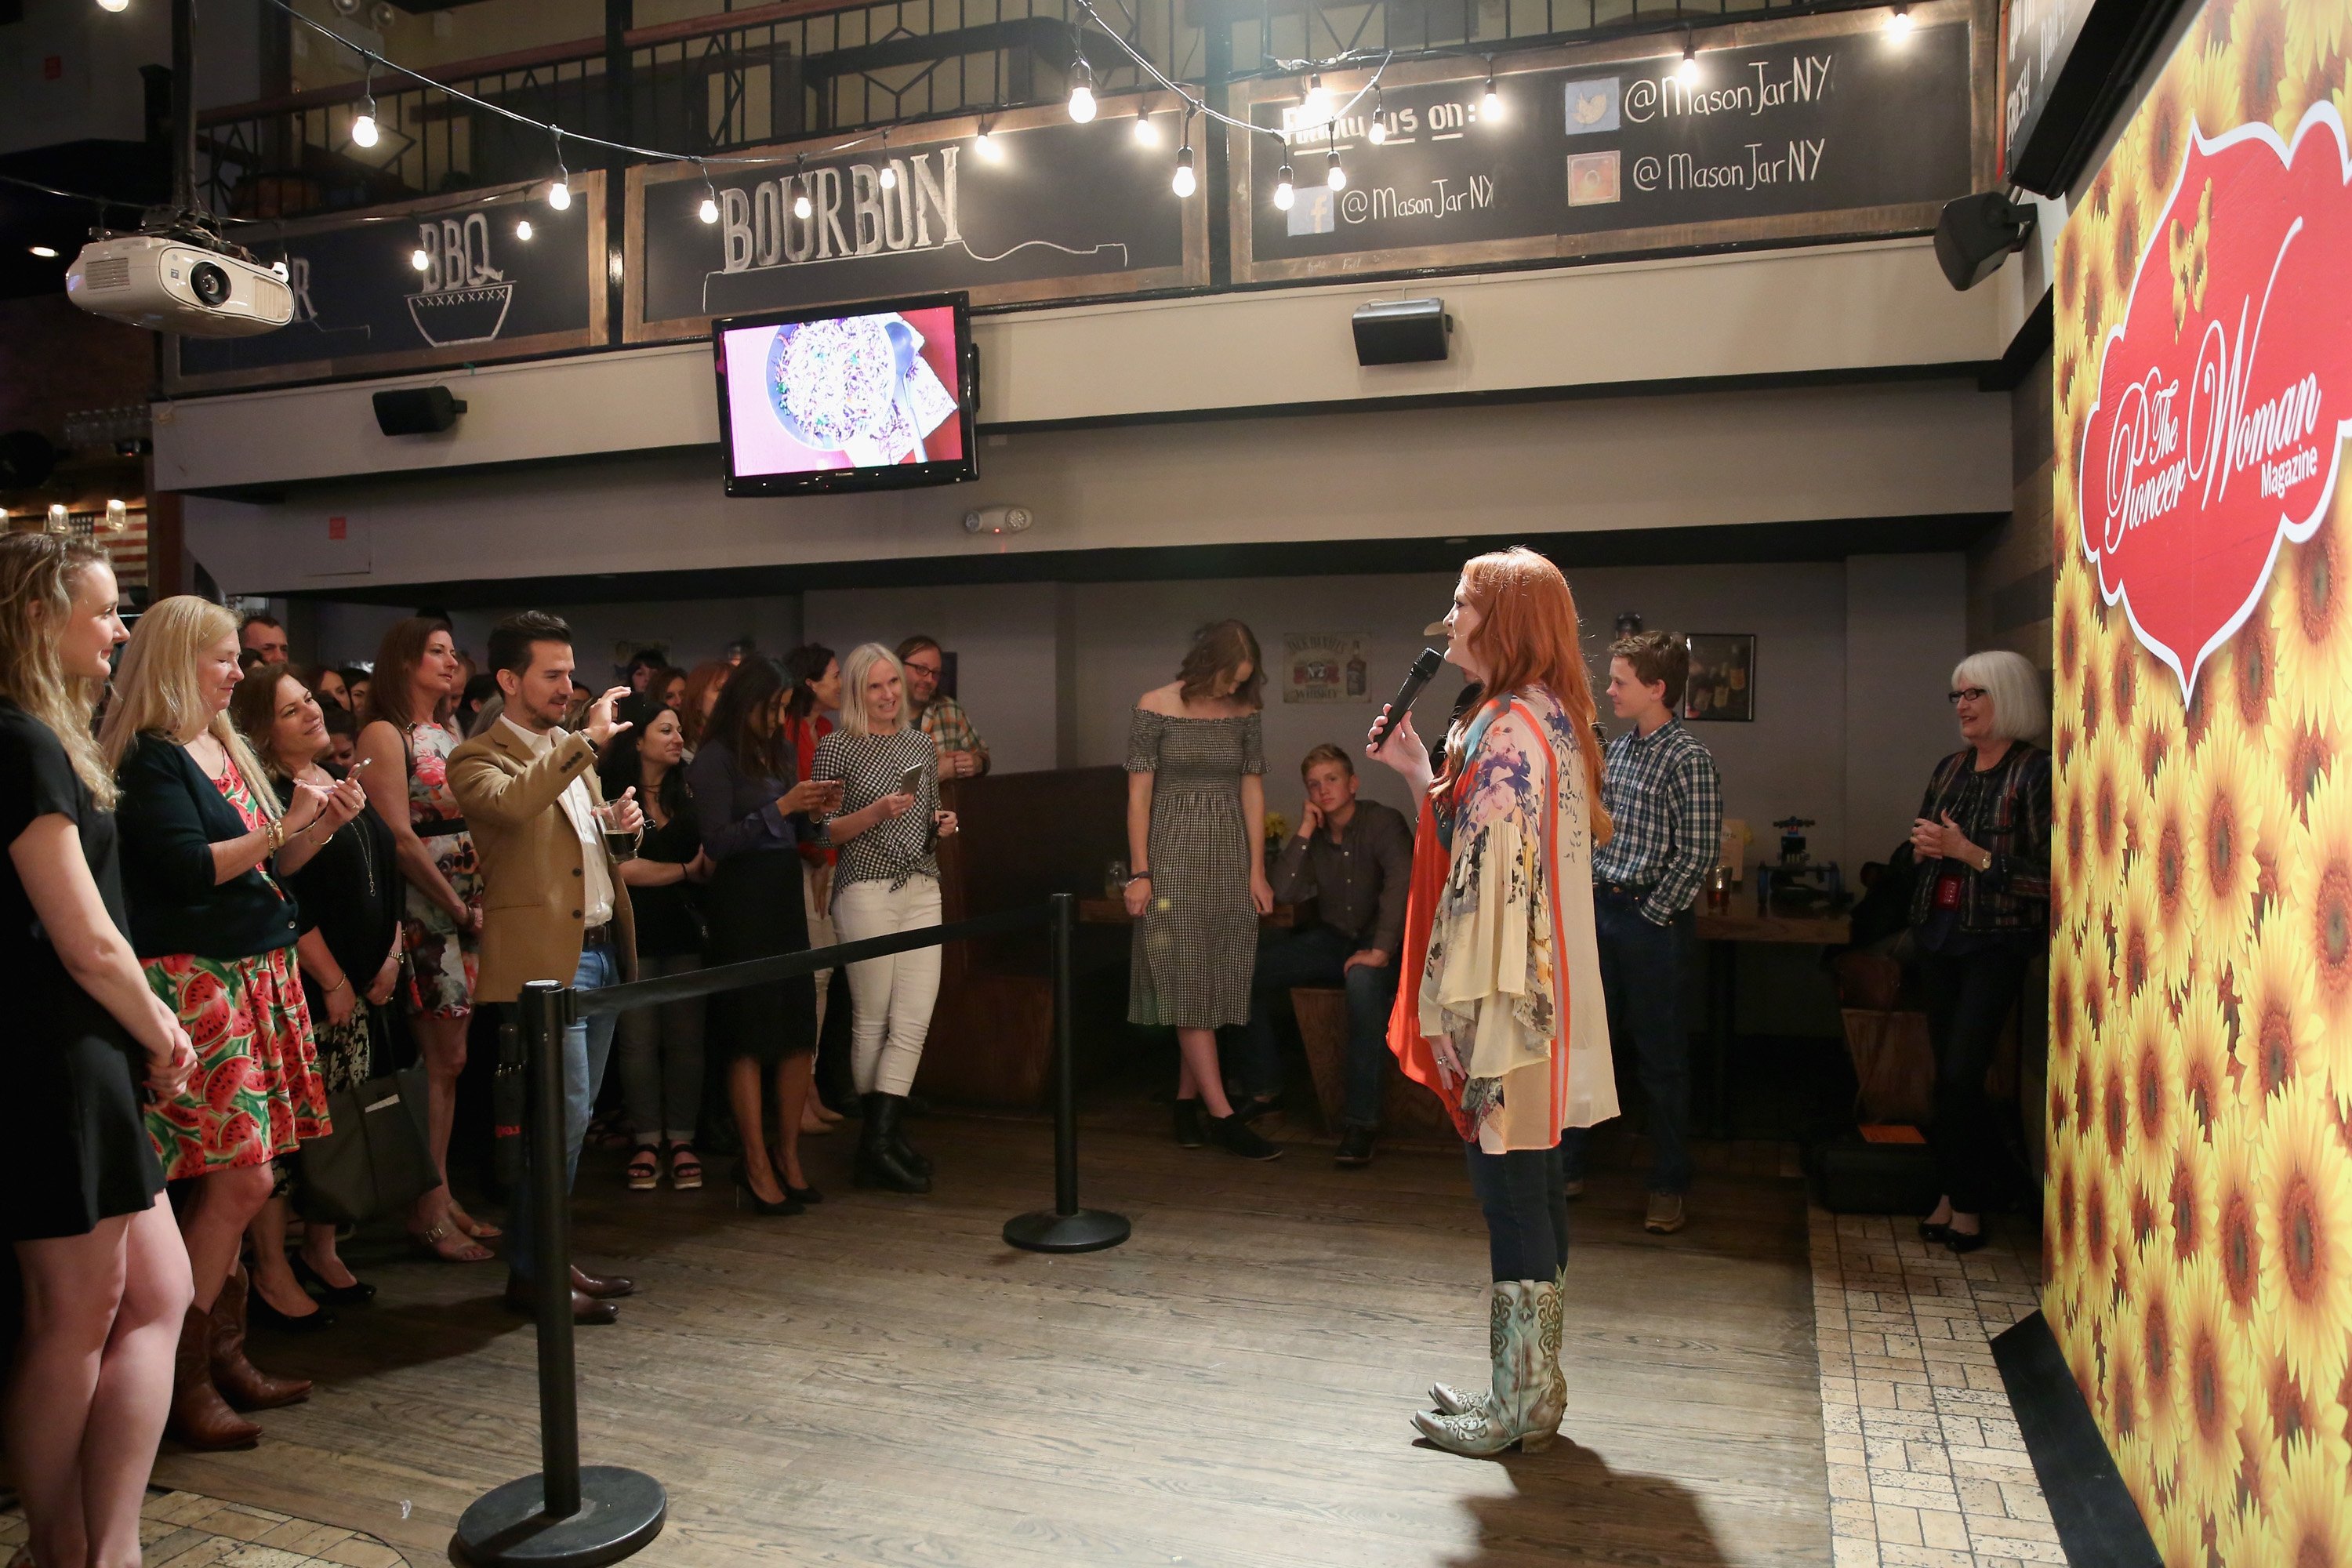 Celebrity chef Ree Drummond wears cowboy boots and a floral top as she speaks to an audience.